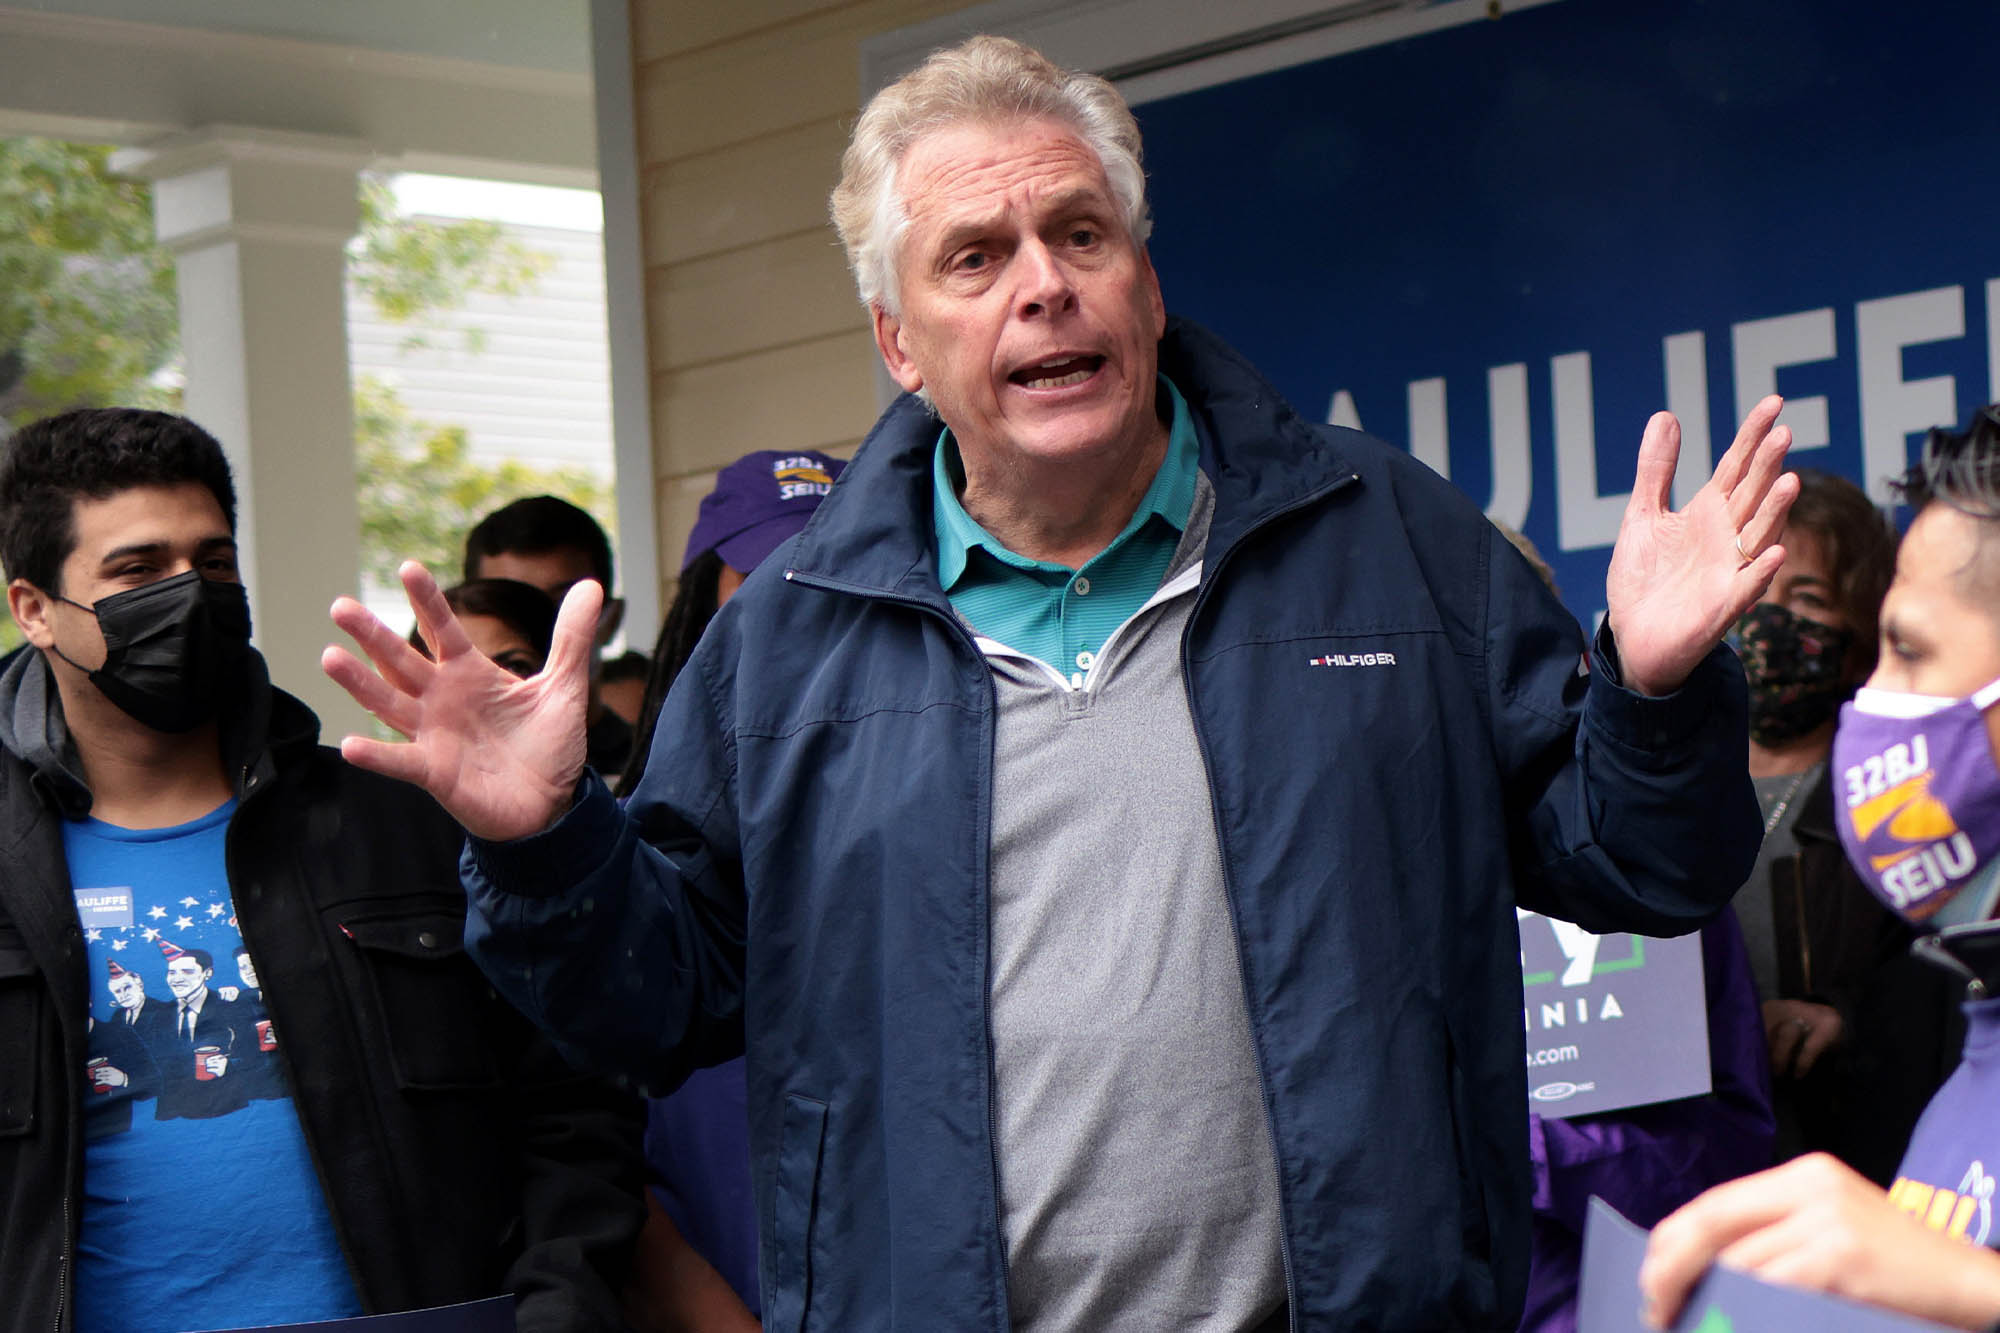 The gubernatorial race between Democrat Terry McAuliffe and Republican Glenn Youngkin is expected to have a high turnout, according to analysts.